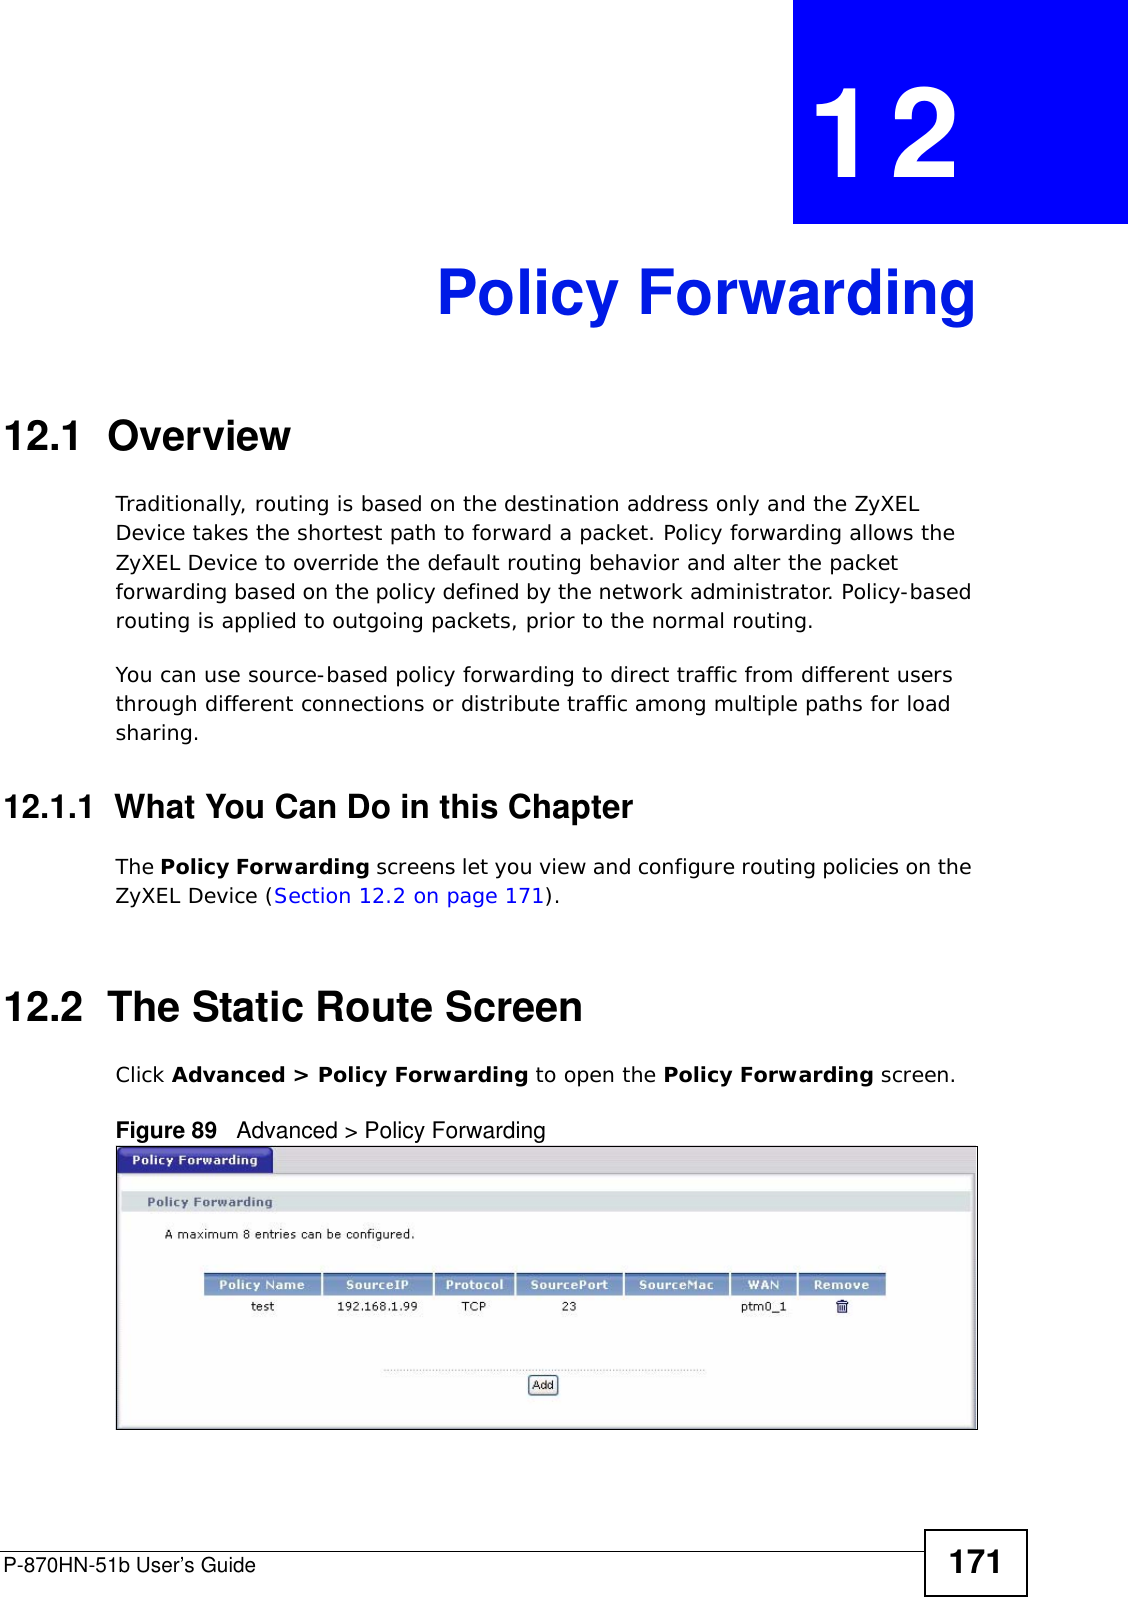 P-870HN-51b User’s Guide 171CHAPTER  12 Policy Forwarding12.1  Overview   Traditionally, routing is based on the destination address only and the ZyXEL Device takes the shortest path to forward a packet. Policy forwarding allows the ZyXEL Device to override the default routing behavior and alter the packet forwarding based on the policy defined by the network administrator. Policy-based routing is applied to outgoing packets, prior to the normal routing.You can use source-based policy forwarding to direct traffic from different users through different connections or distribute traffic among multiple paths for load sharing.12.1.1  What You Can Do in this ChapterThe Policy Forwarding screens let you view and configure routing policies on the ZyXEL Device (Section 12.2 on page 171).12.2  The Static Route ScreenClick Advanced &gt; Policy Forwarding to open the Policy Forwarding screen. Figure 89   Advanced &gt; Policy Forwarding